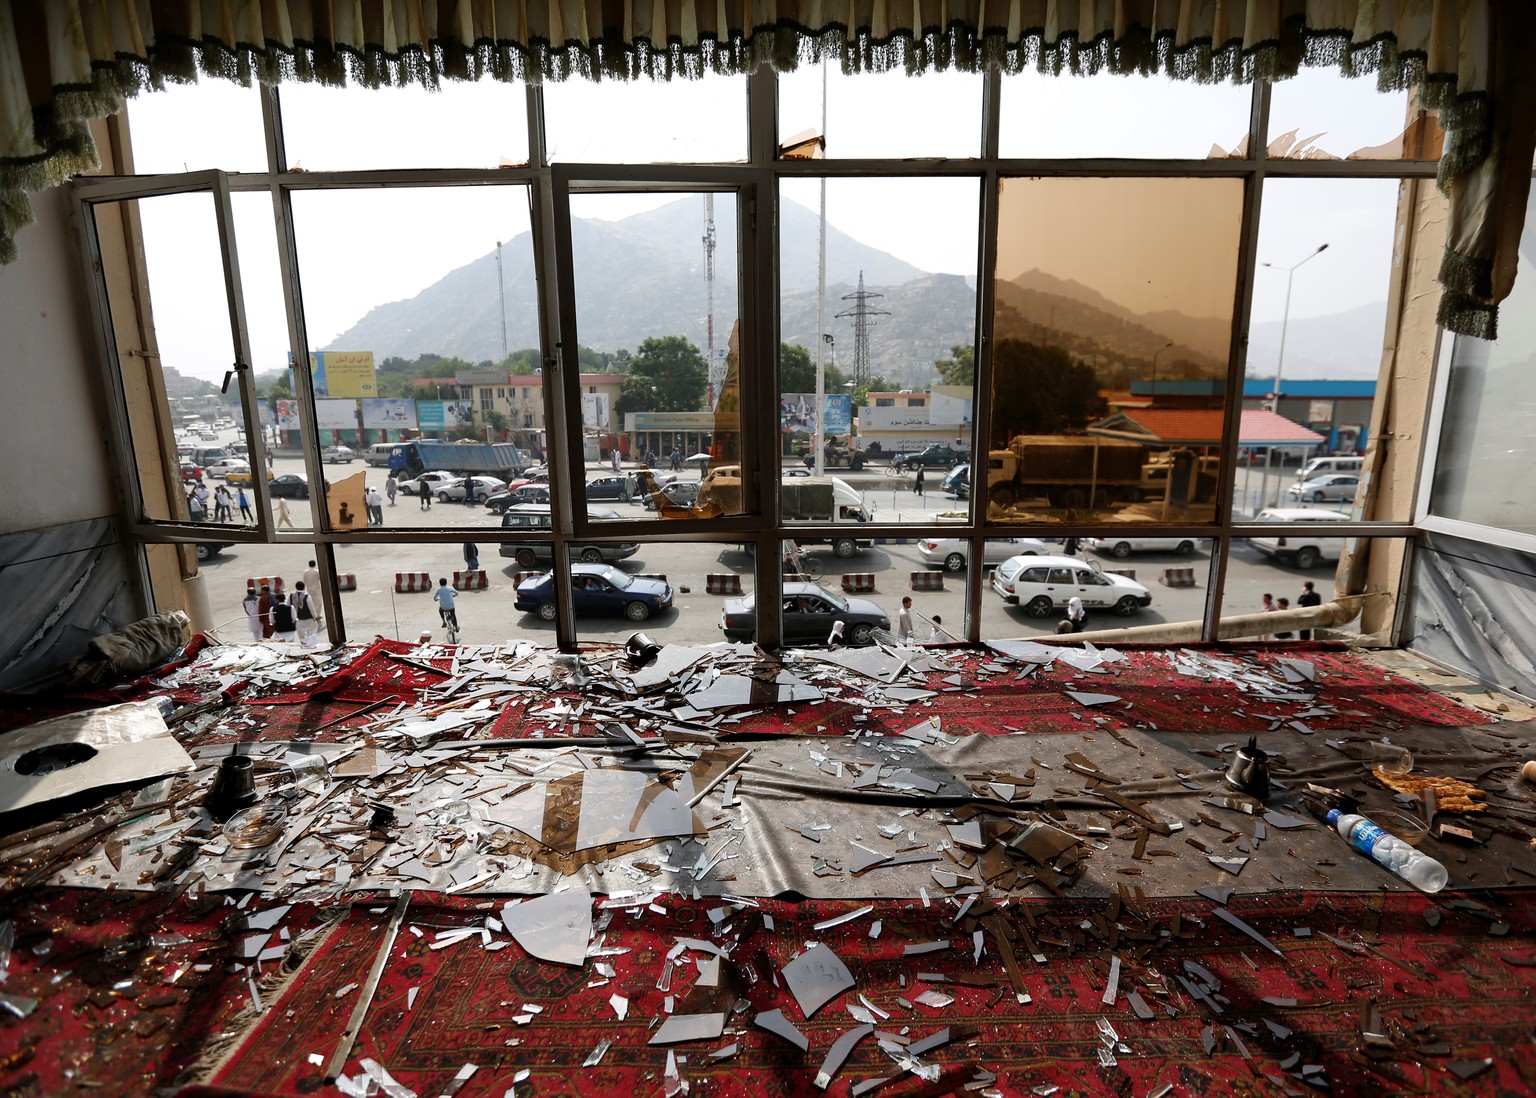 Broken glass and debris are seen inside a resturant a day after a suicide attack in Kabul, Afghanistan July 24, 2016. REUTERS/Mohammad Ismail TPX IMAGES OF THE DAY